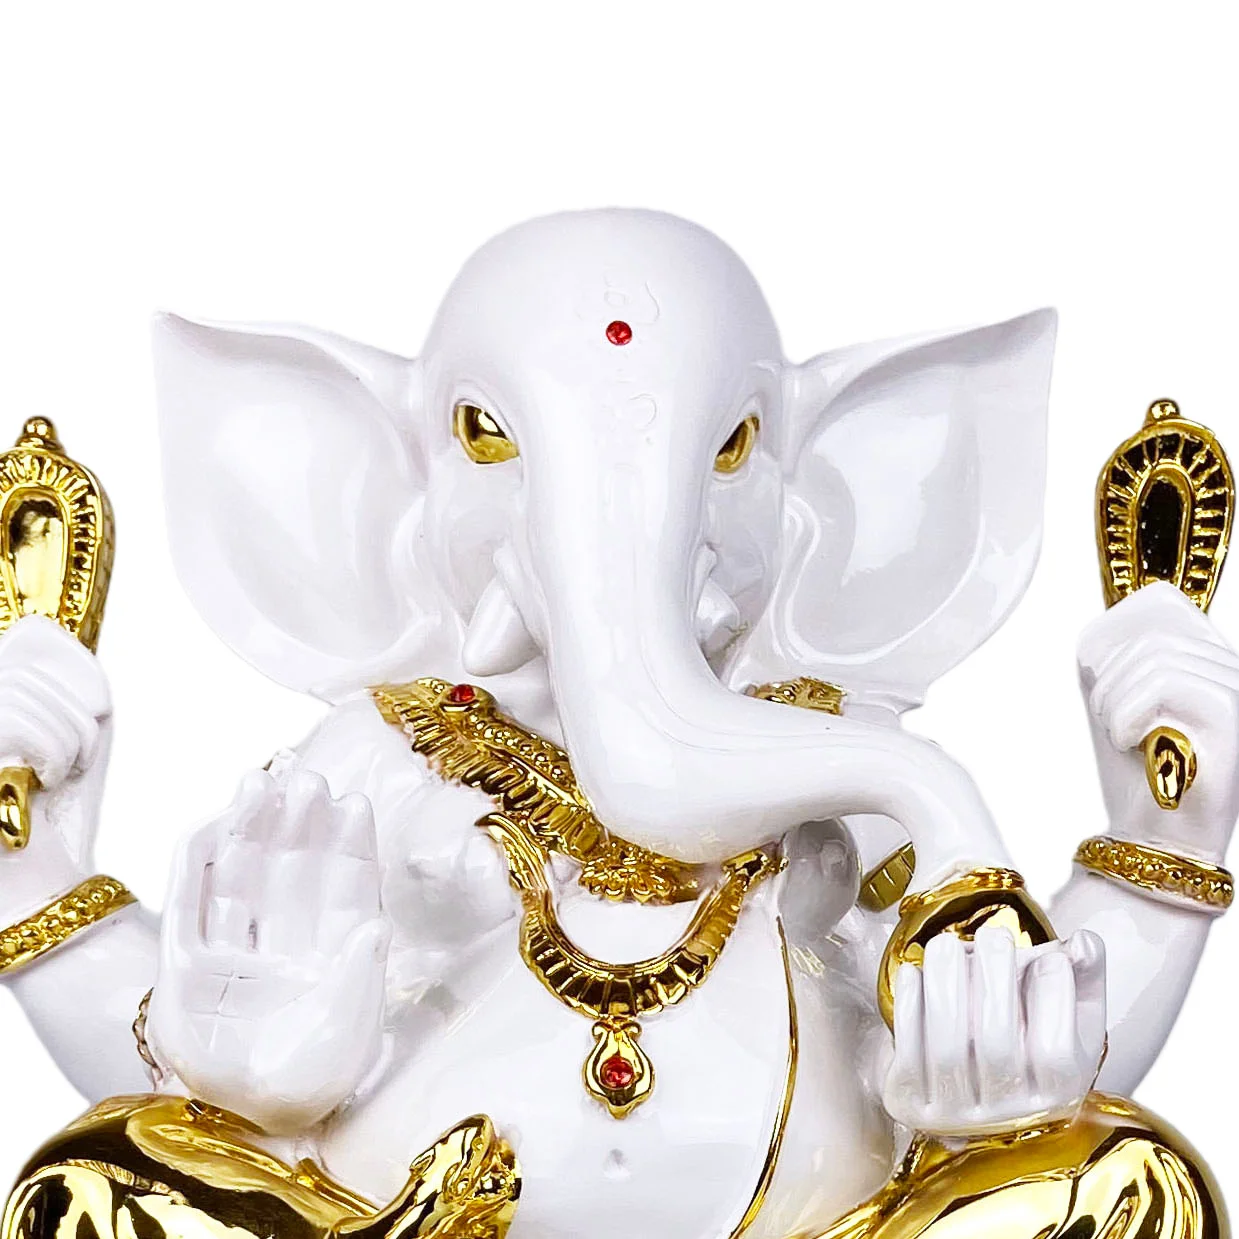 

Large Gold White hindu gods lord ganesha statue 12 Inch Ganesh Idol Figurine for Home Temple Table Decoration